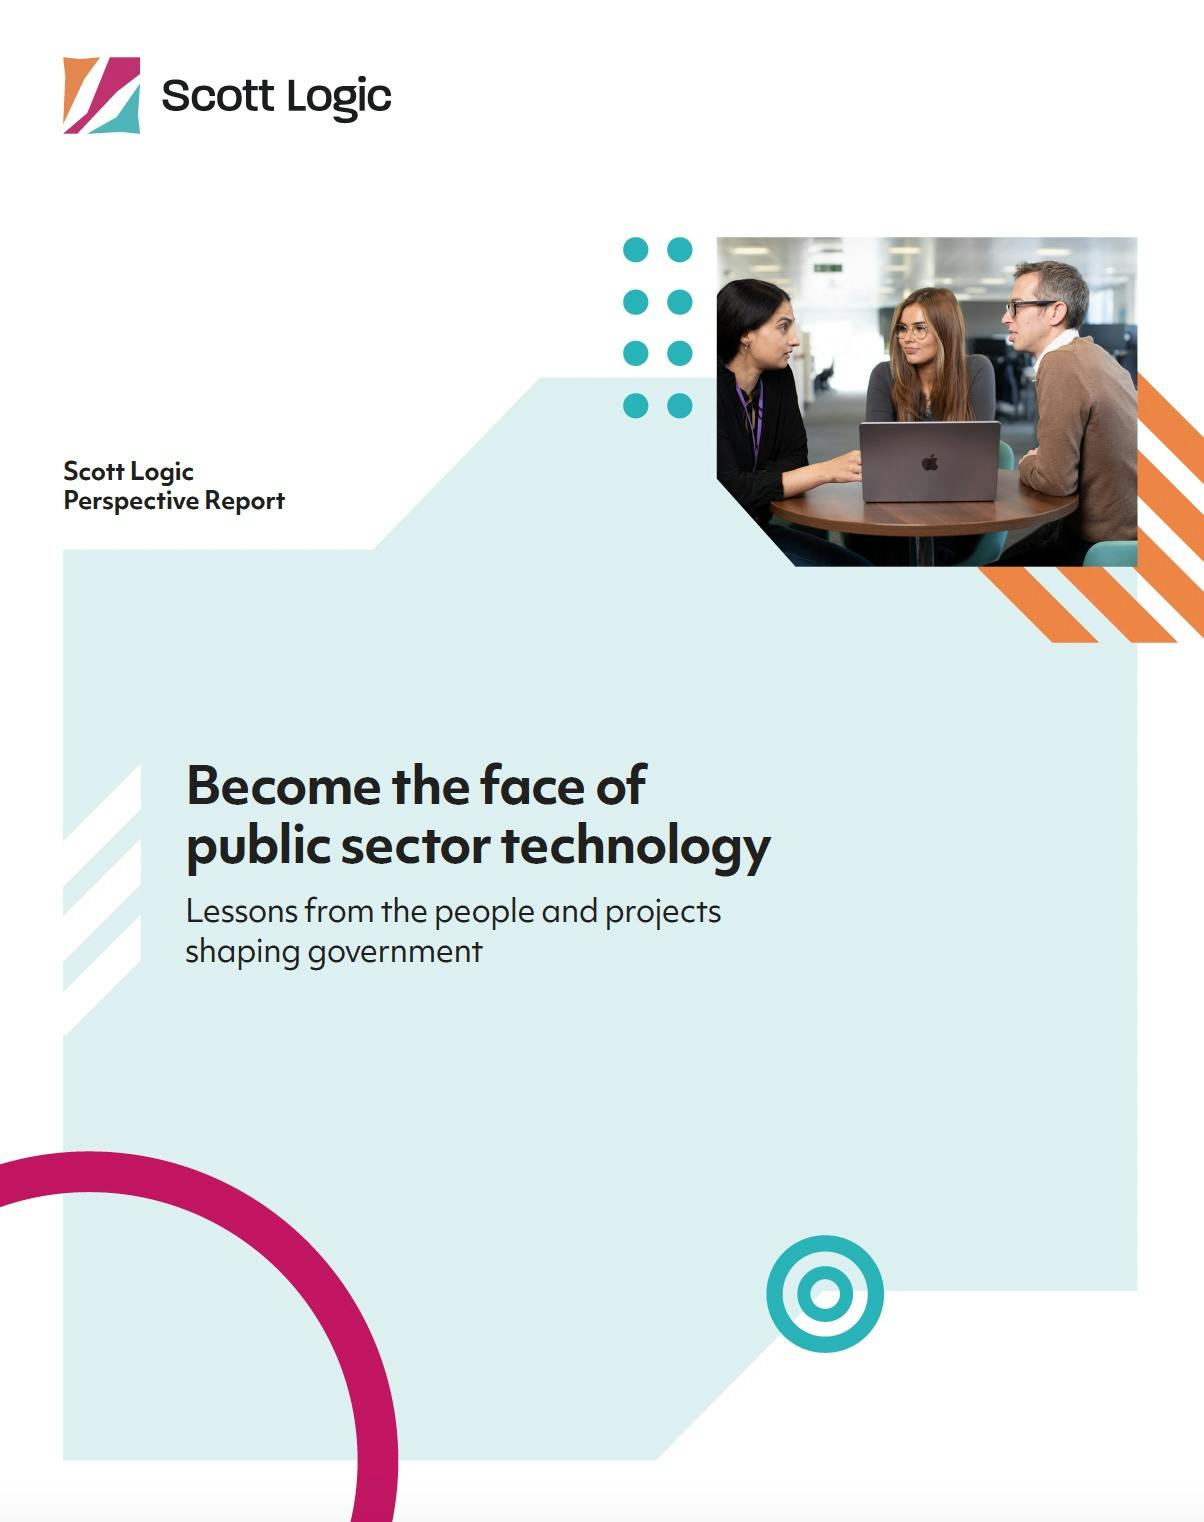 Become the face of public sector technology